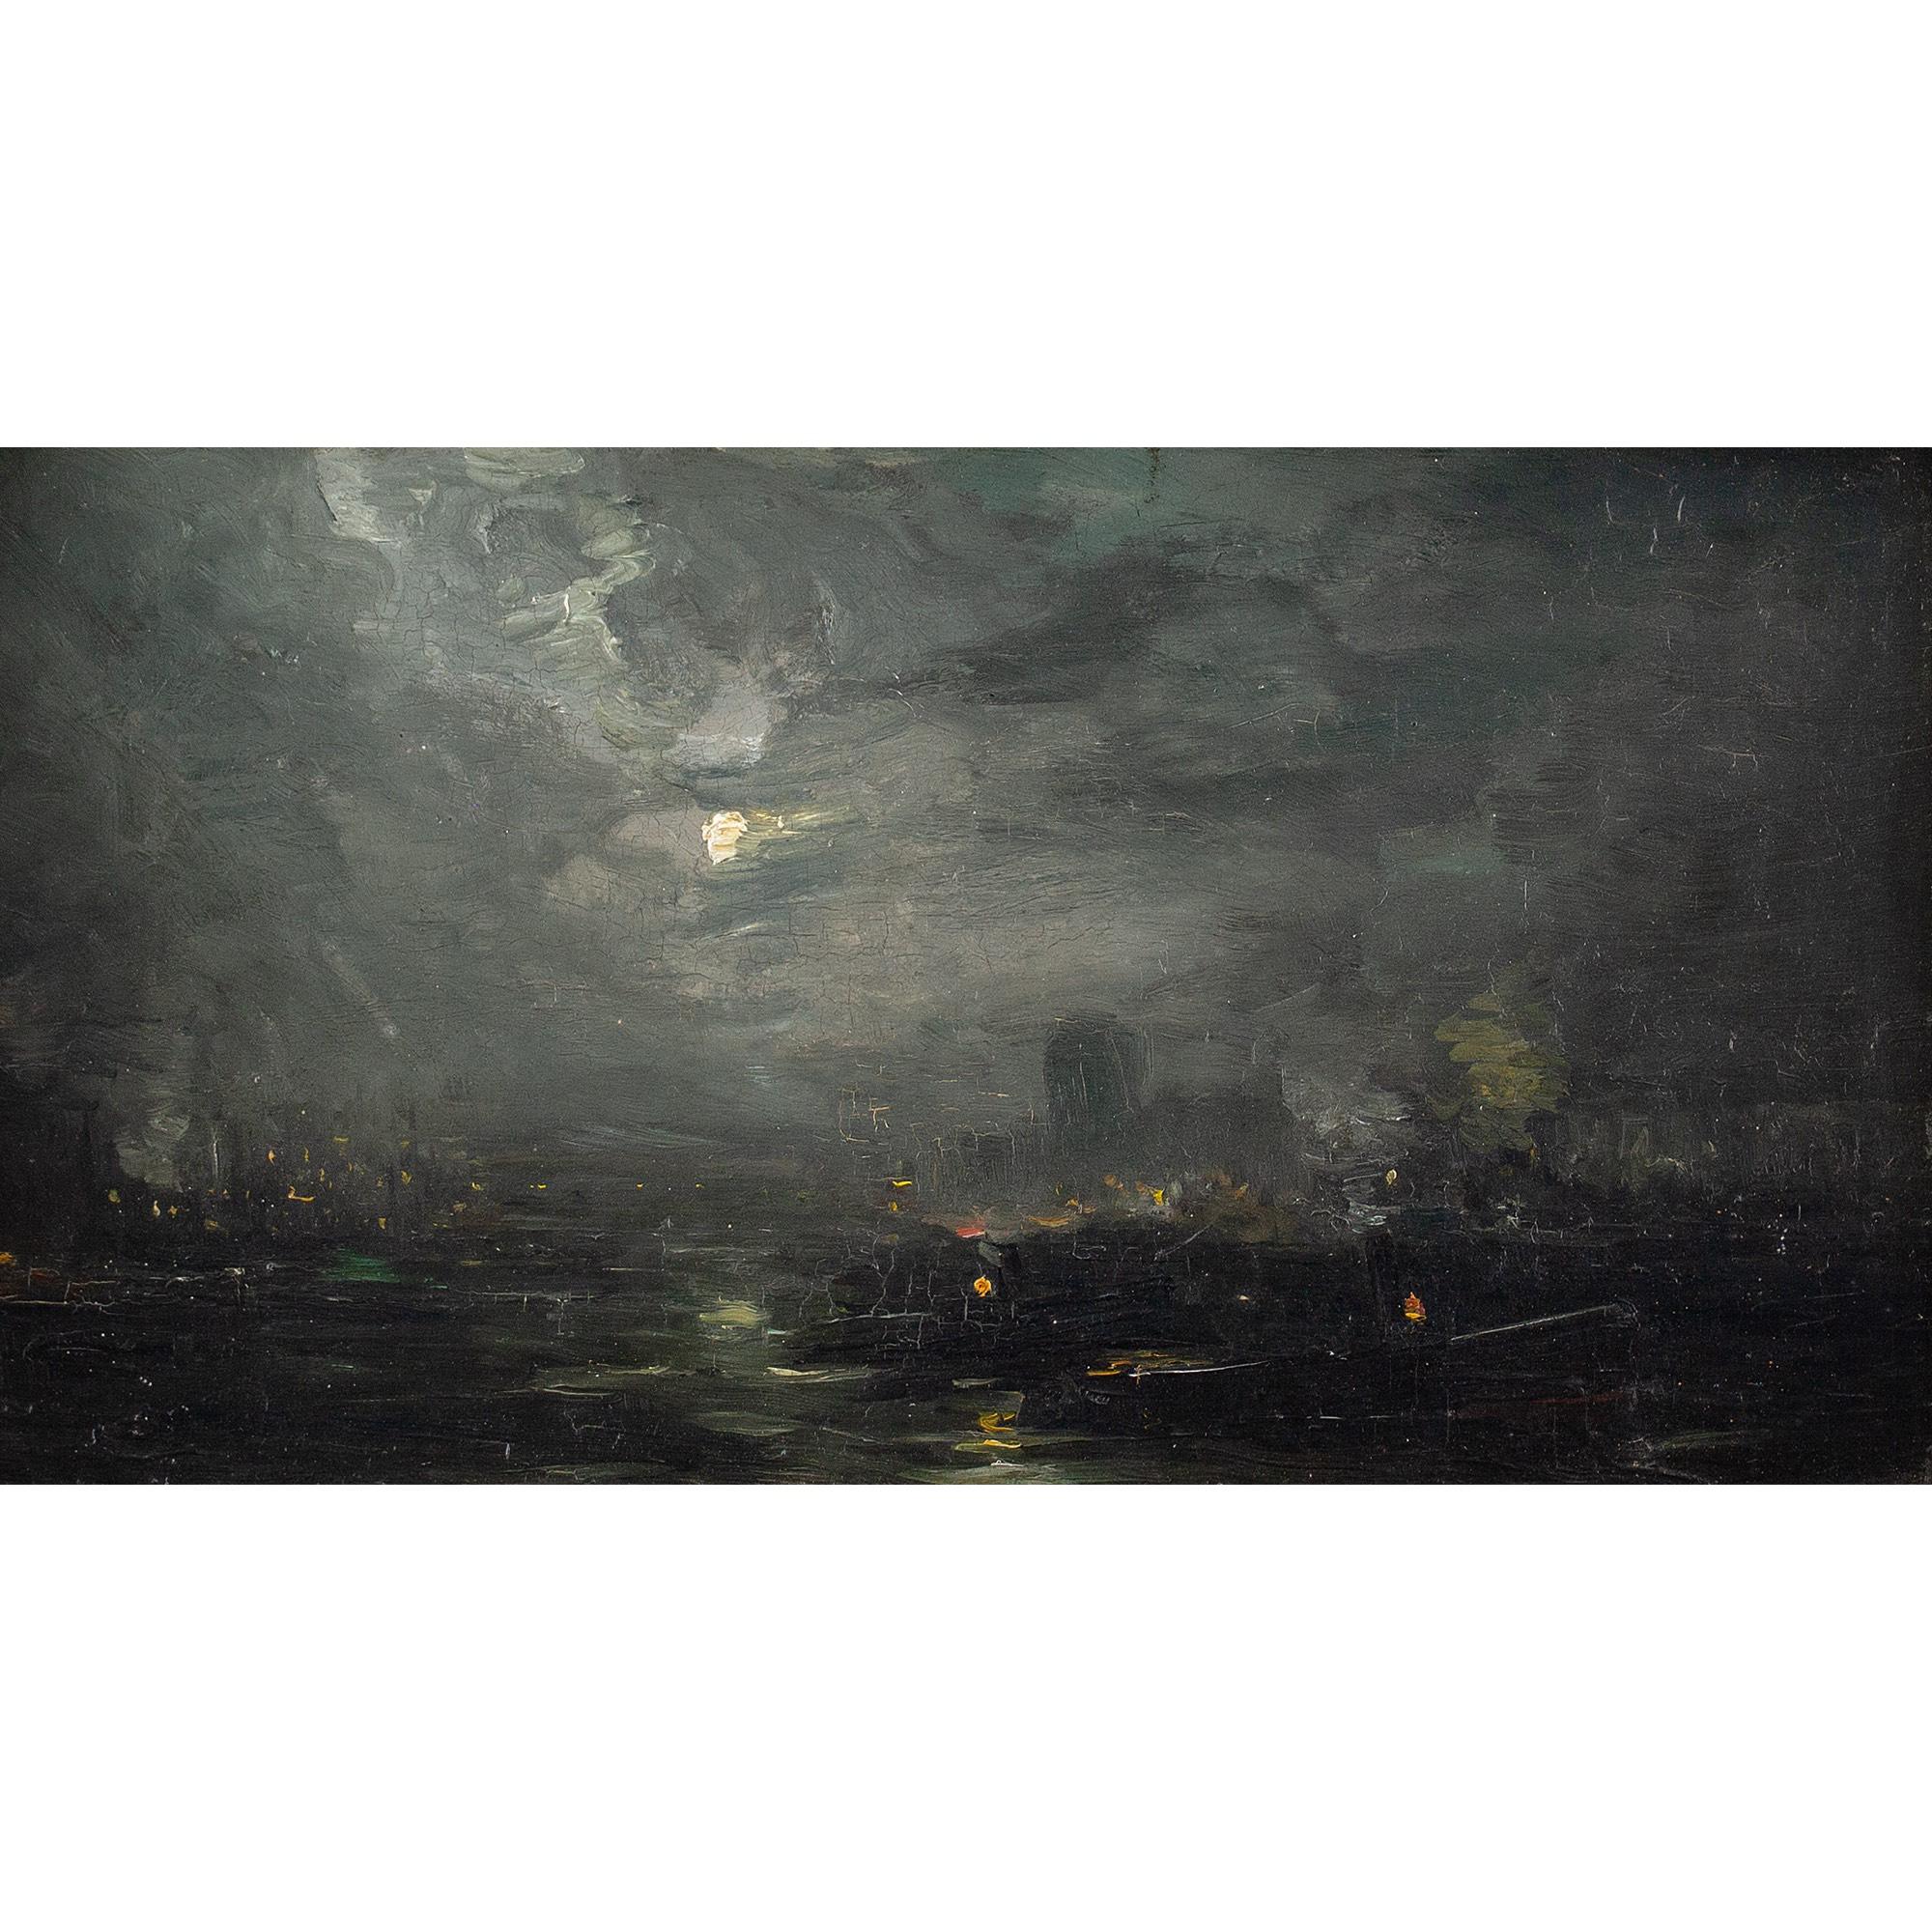 This late 19th-century oil painting by Belgian artist Alexandre Marcette (1853-1929) depicts a coastal view in Dordrecht, Netherlands.

Through a smoky haze of dense clouds, the moon shimmers. Tugboats, moored at windswept Dordrecht, bob amid near